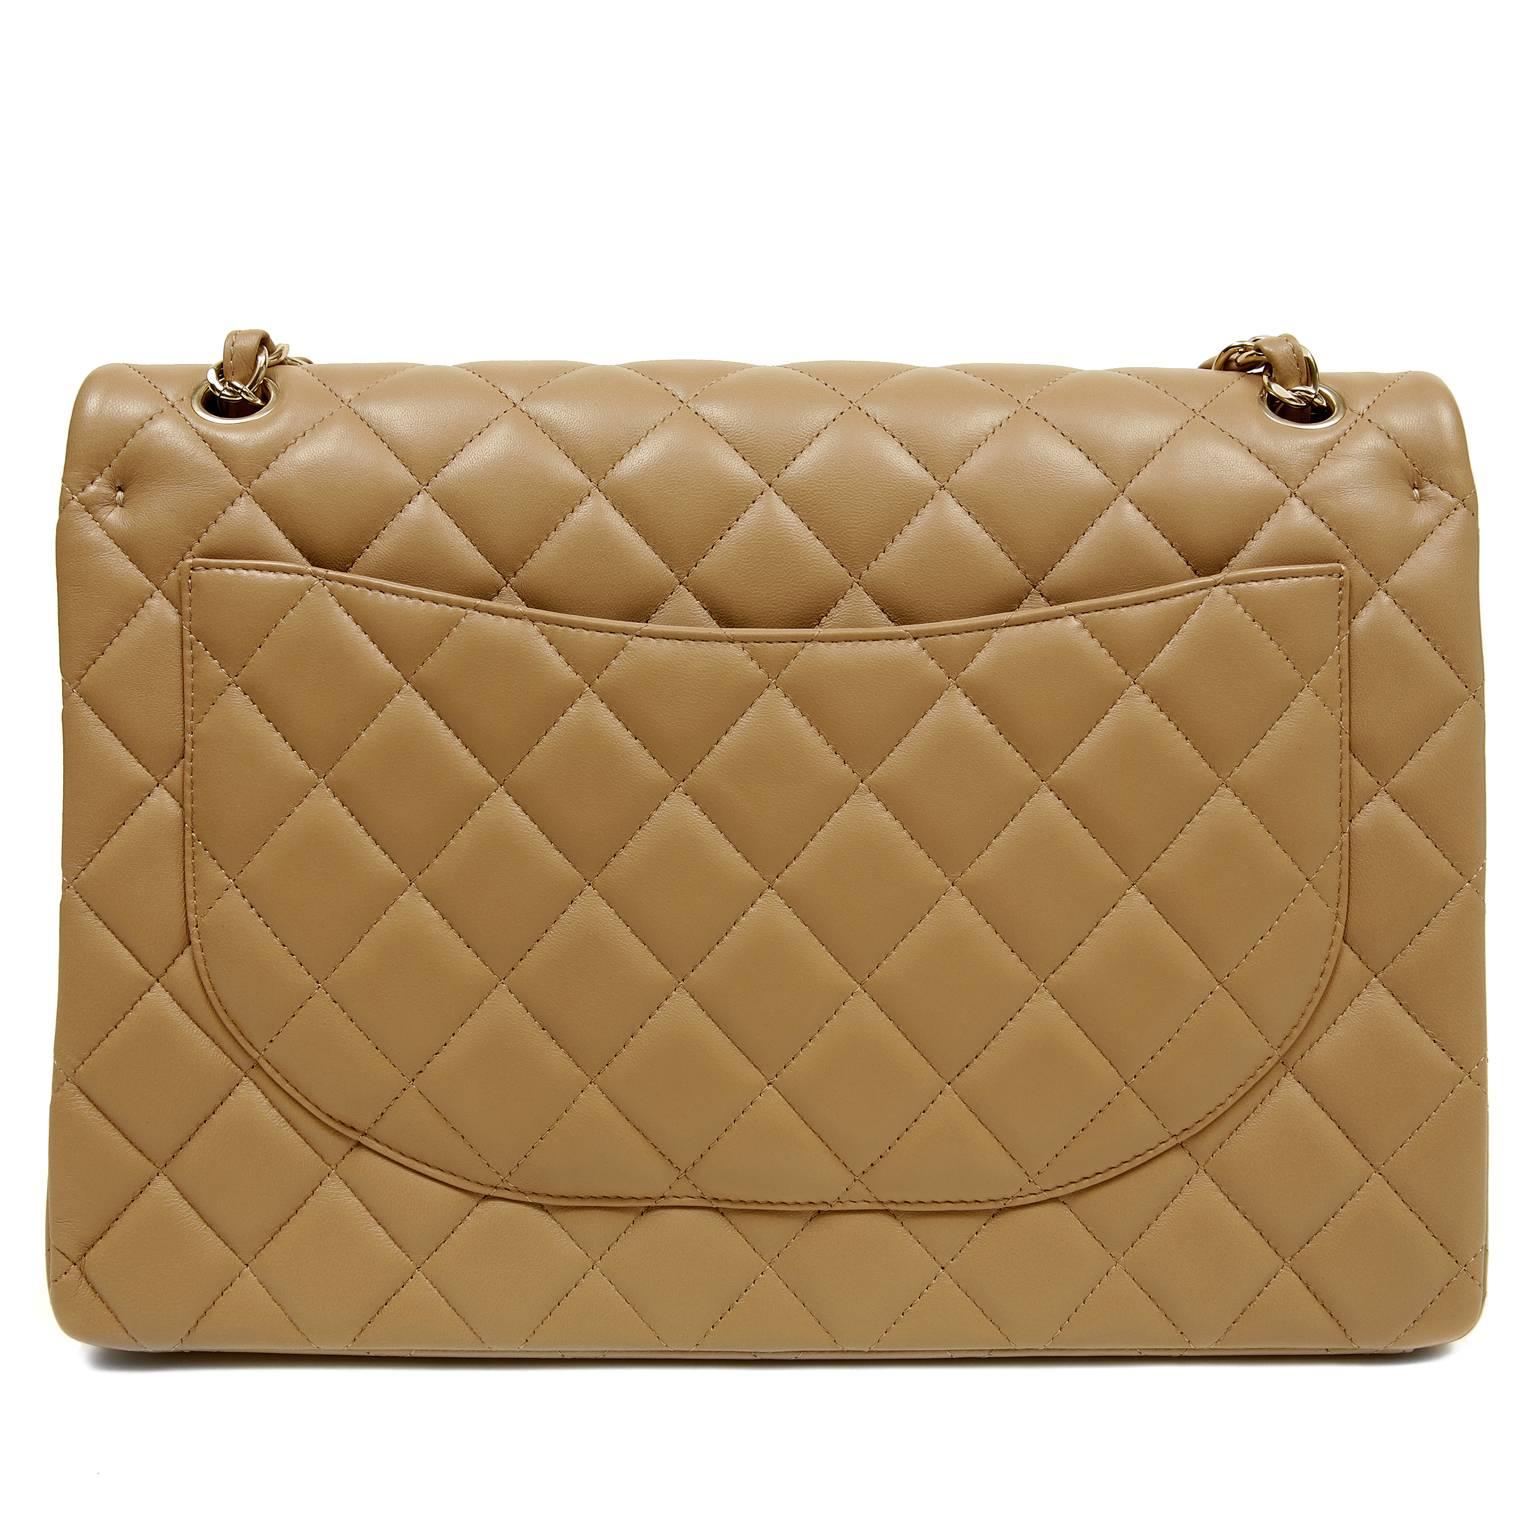 Chanel Beige Lambskin Maxi- PRISTINE; Never Carried
  A must have for any wardrobe in neutral camel with gold hardware, the Maxi is perfect for year round enjoyment.

Beige lambskin is quilted in signature Chanel diamond stitched pattern.  Gold